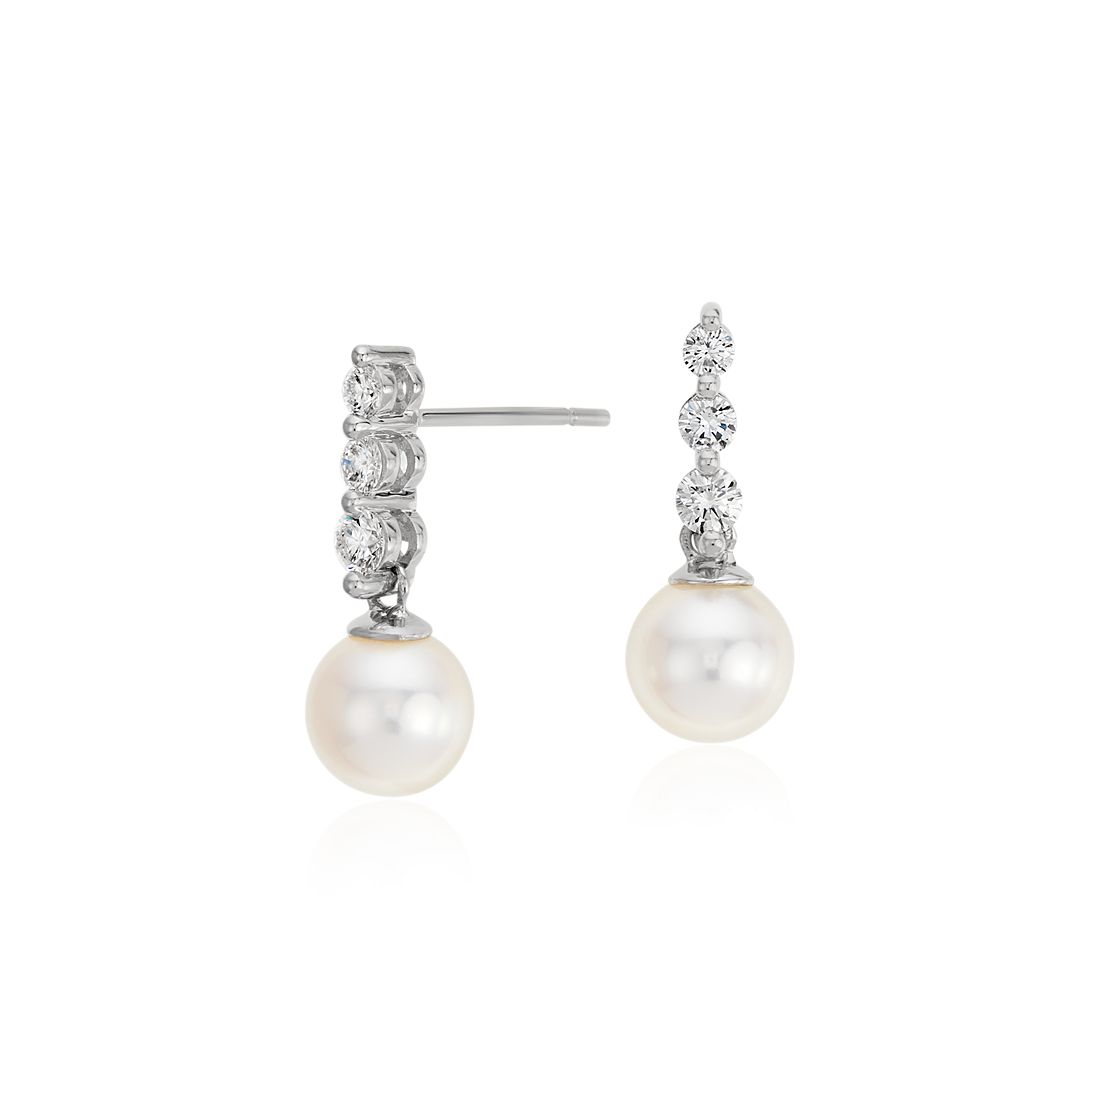 Antique Vintage White Round Akoya Pearl Dangle Earrings 14K White Gold Plated 